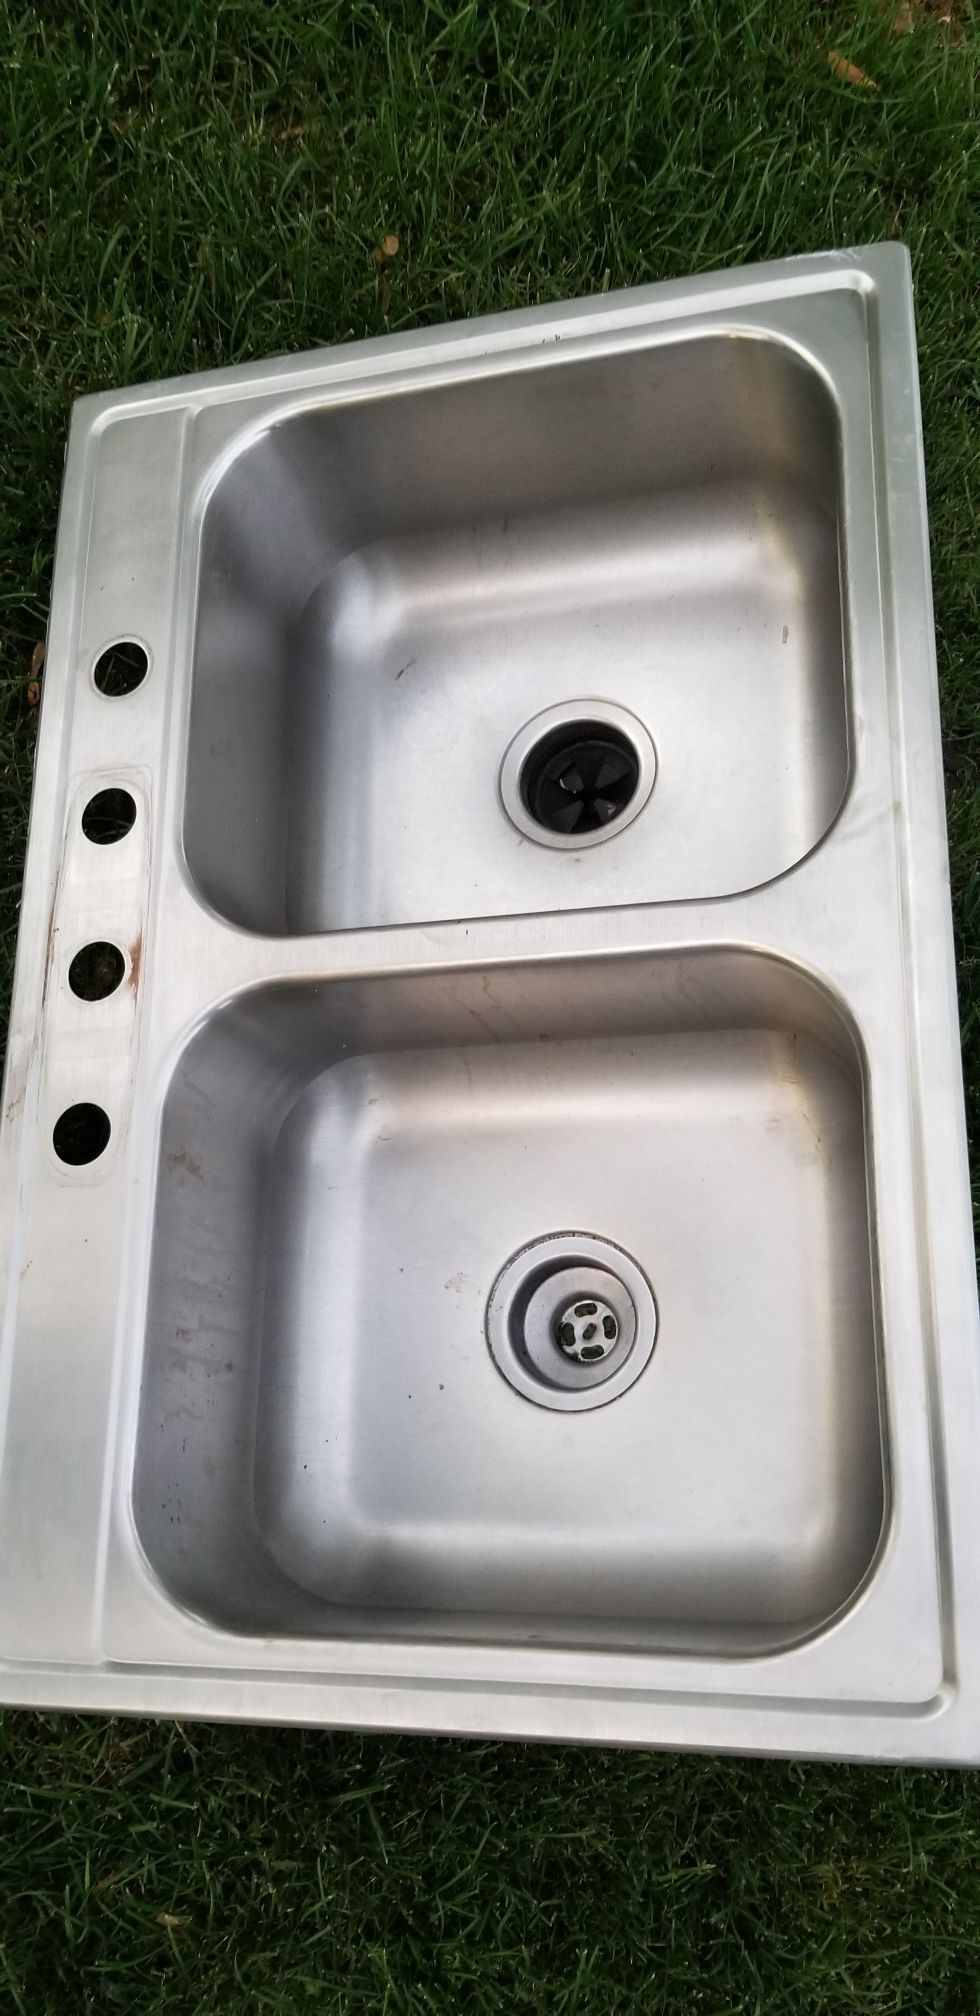 Stainless steel kitchen sink in good condition see pictures for dimensions